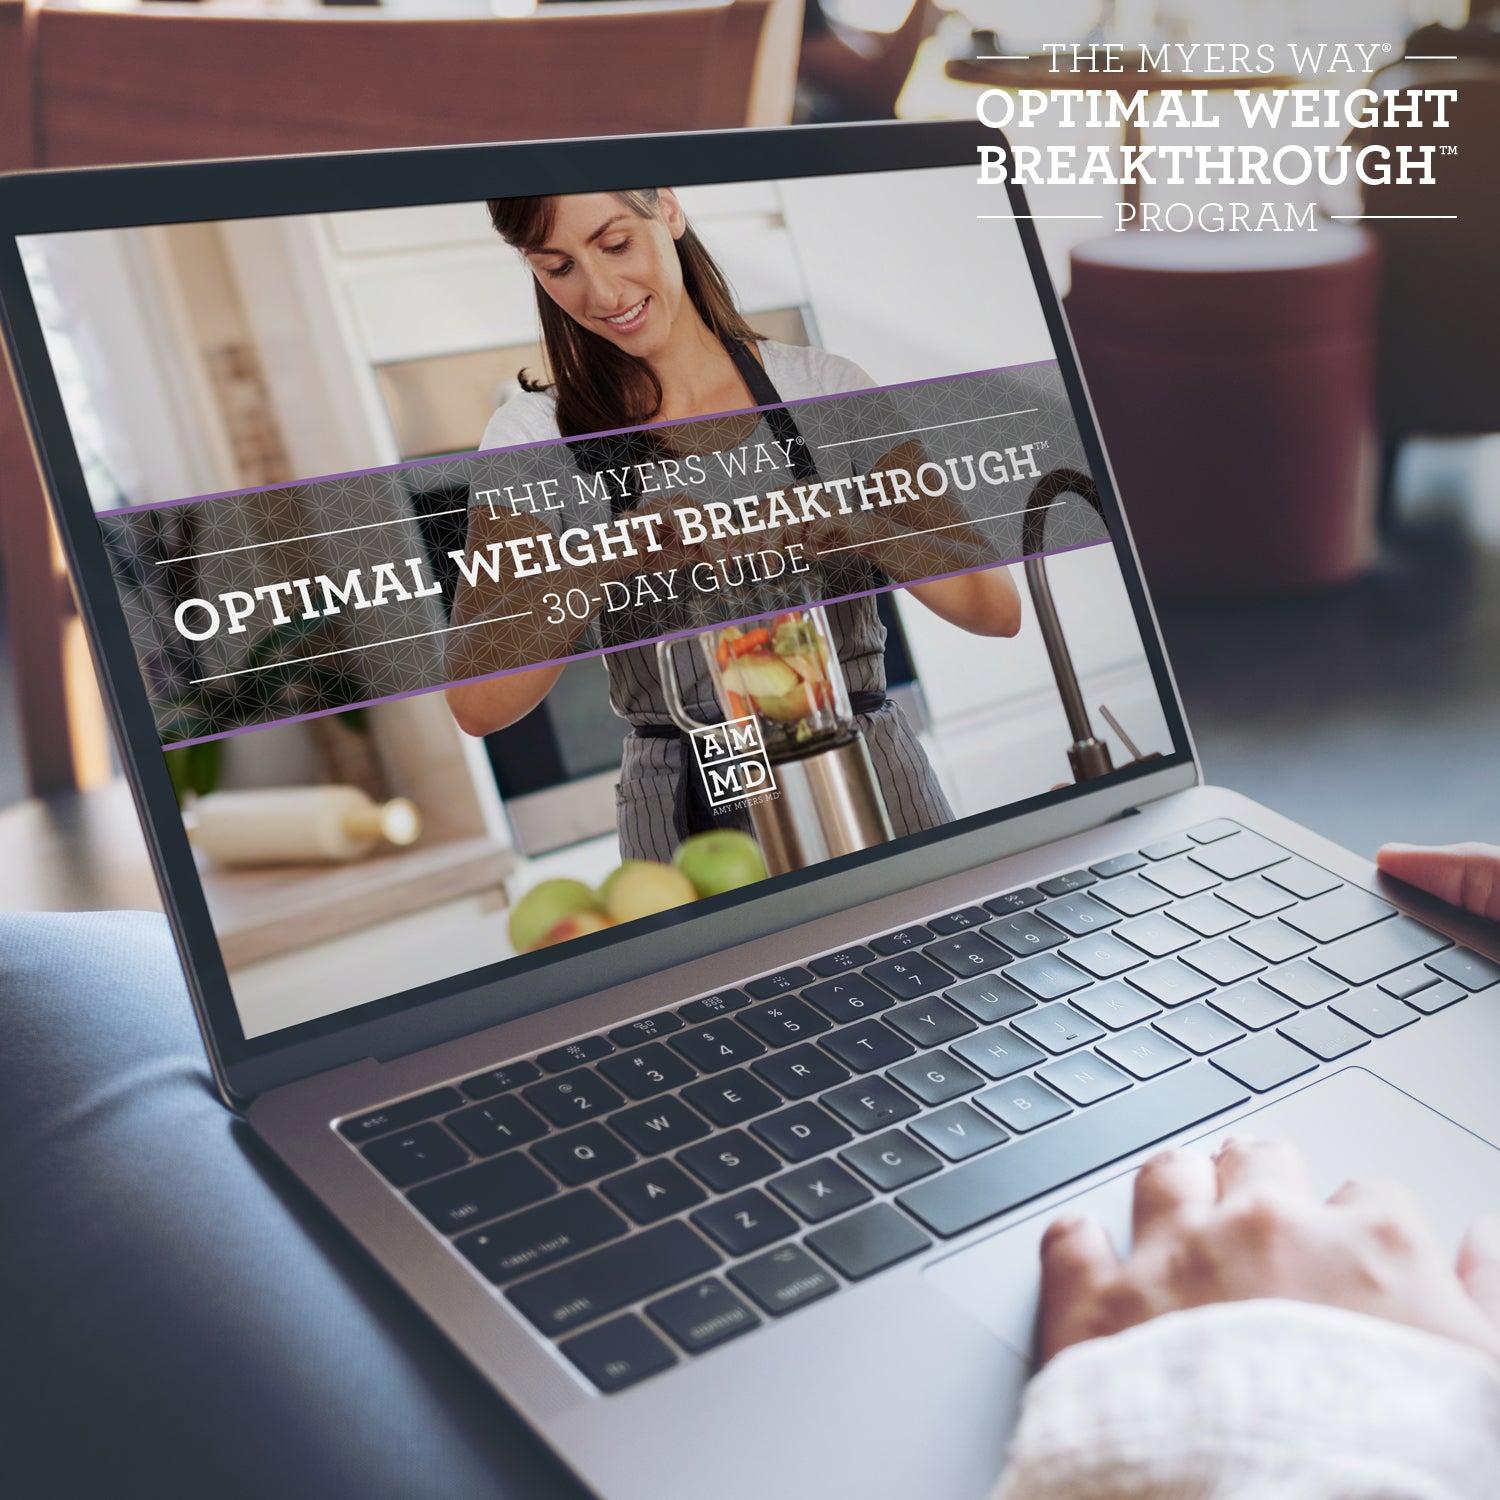 A Woman views the Upgraded Optimal Weight Breakthrough Program 30-Day Guide on a laptop computer - Amy Myers MD®